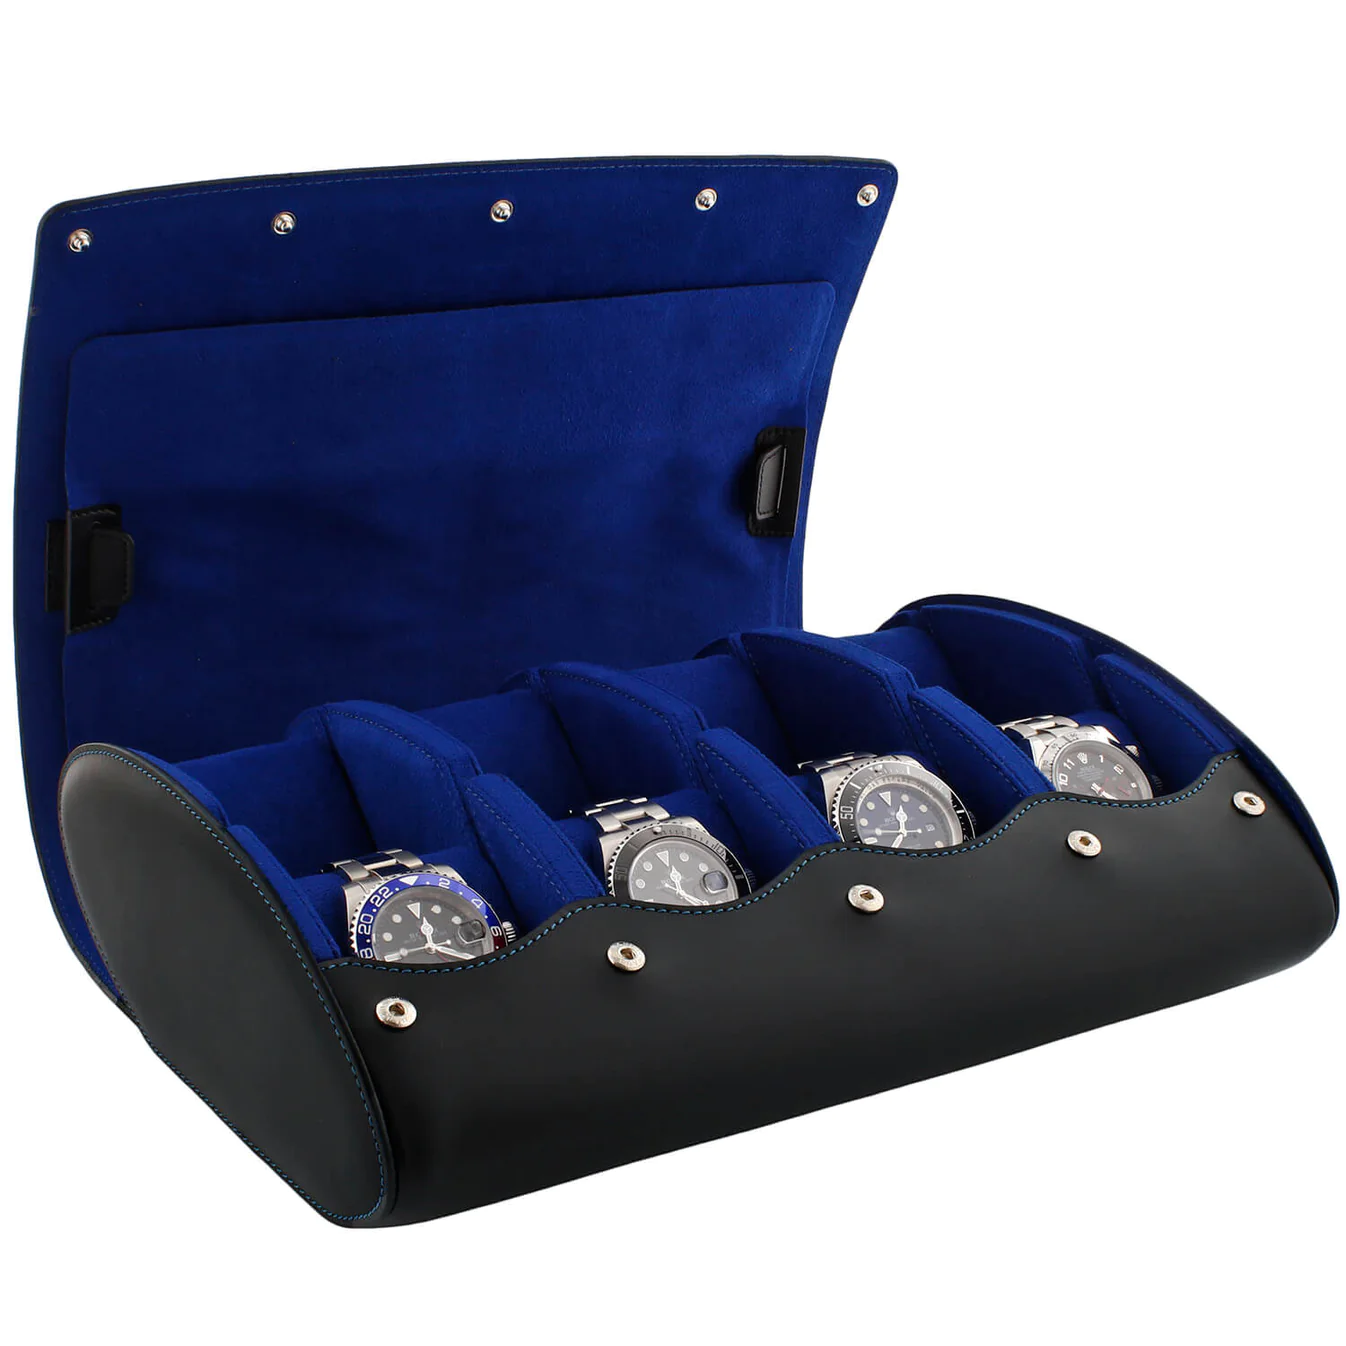 The Perfect Travel Companion Aevitas Leather Watch Cases for the Discerning Watch Collector